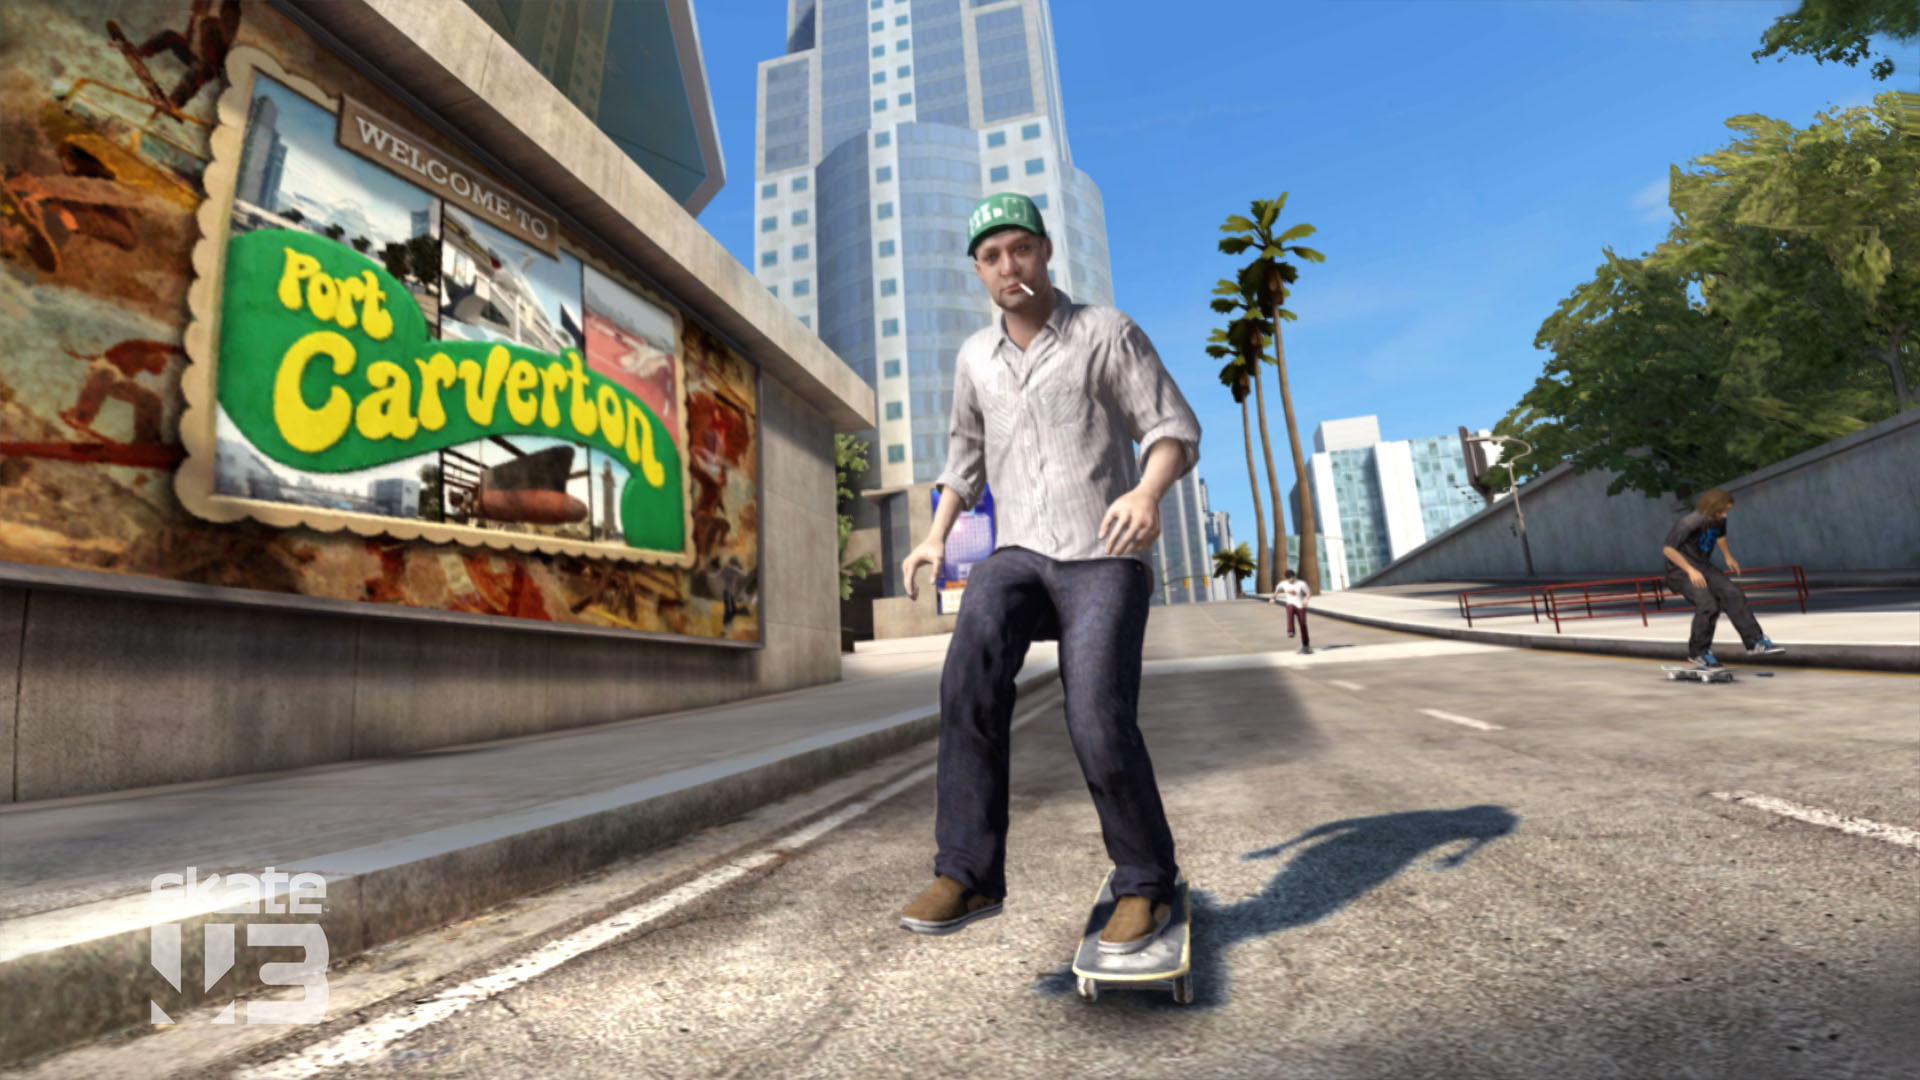 Skate 3 screenshots, images and pictures - Giant Bomb